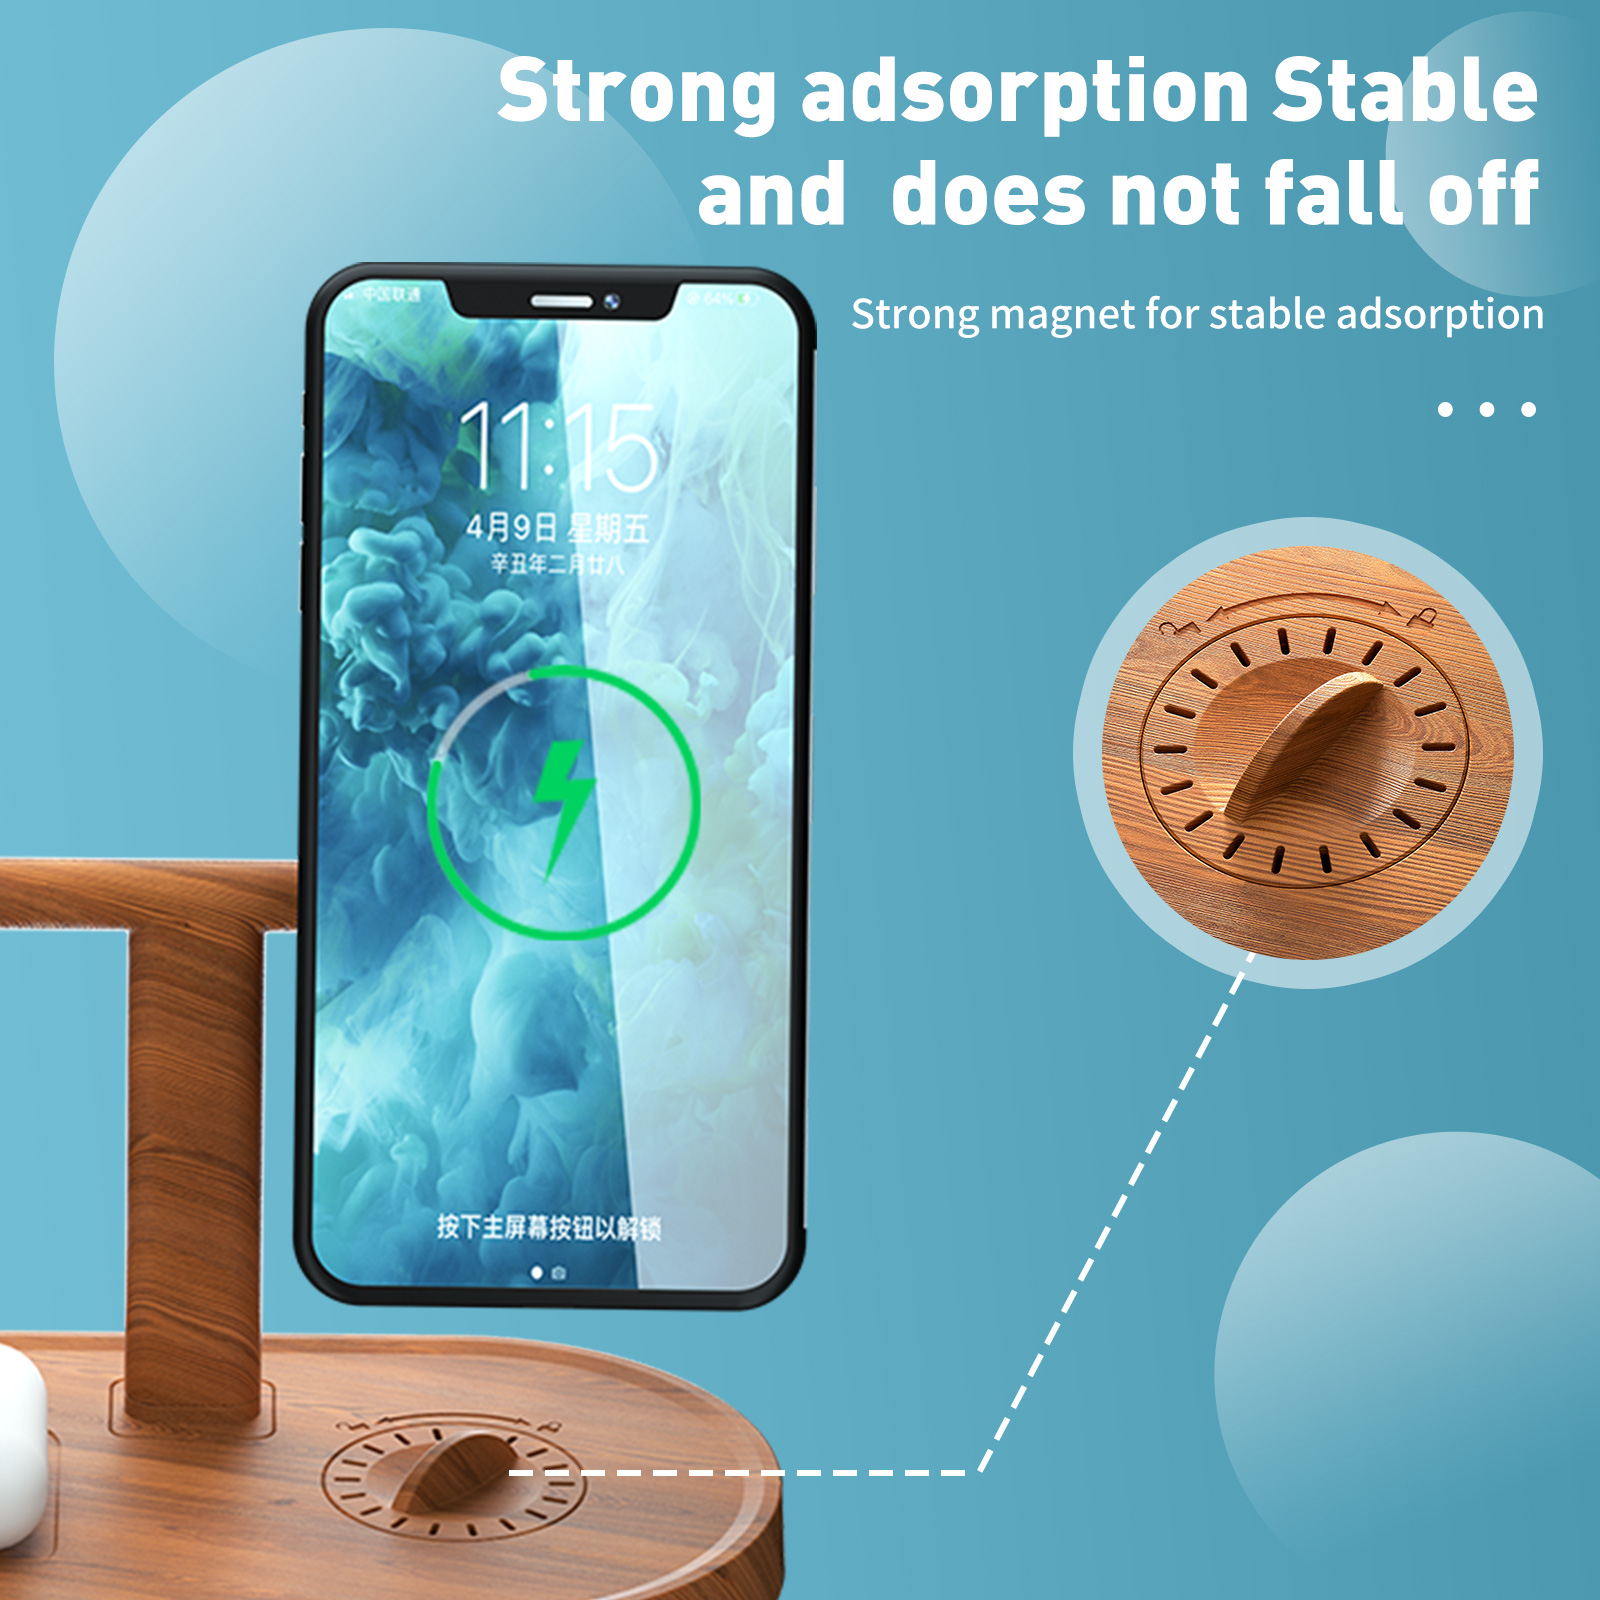 SMOIVE 3 in 1 Wireless Qi Fast Charger Dock Stand for iPhone 12 And Above &AirPods 2 and above & Apple Watch (Wood Color) - image 7 of 8